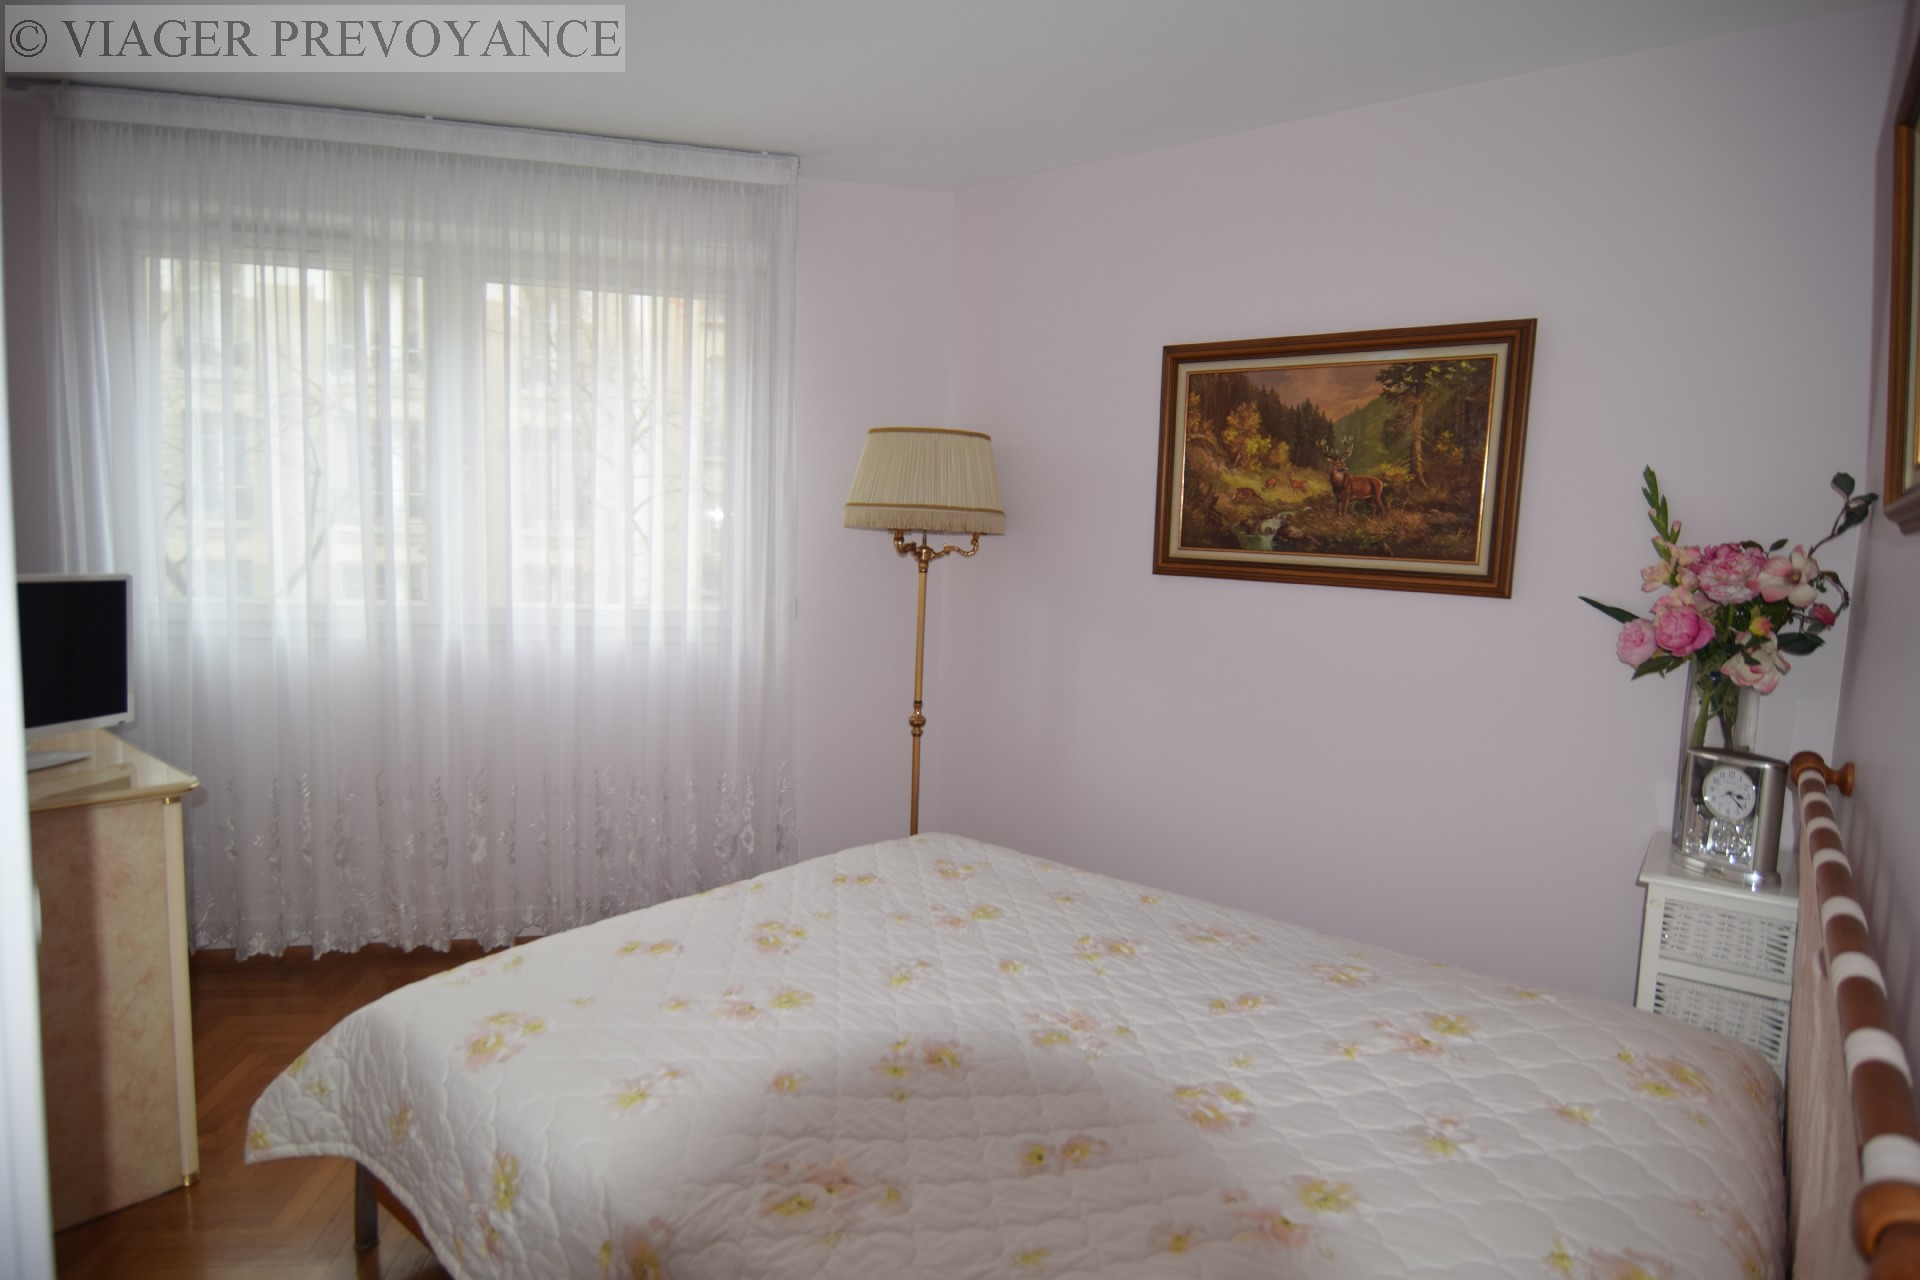 Apartment A property to buy, , 52 m², 2 rooms